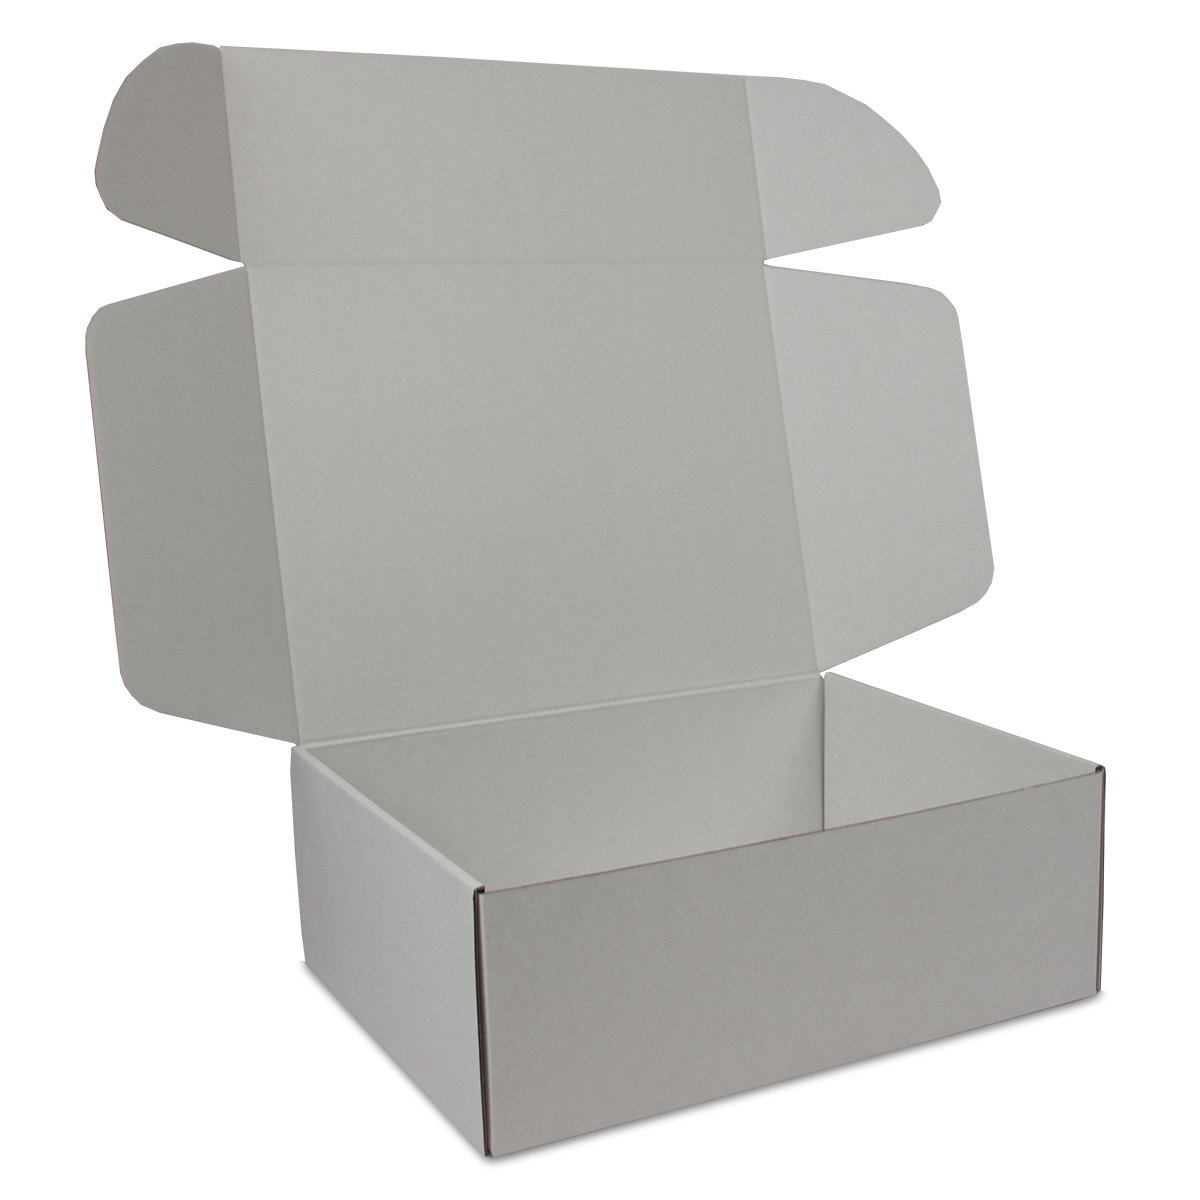 Food boxes/Meal boxes